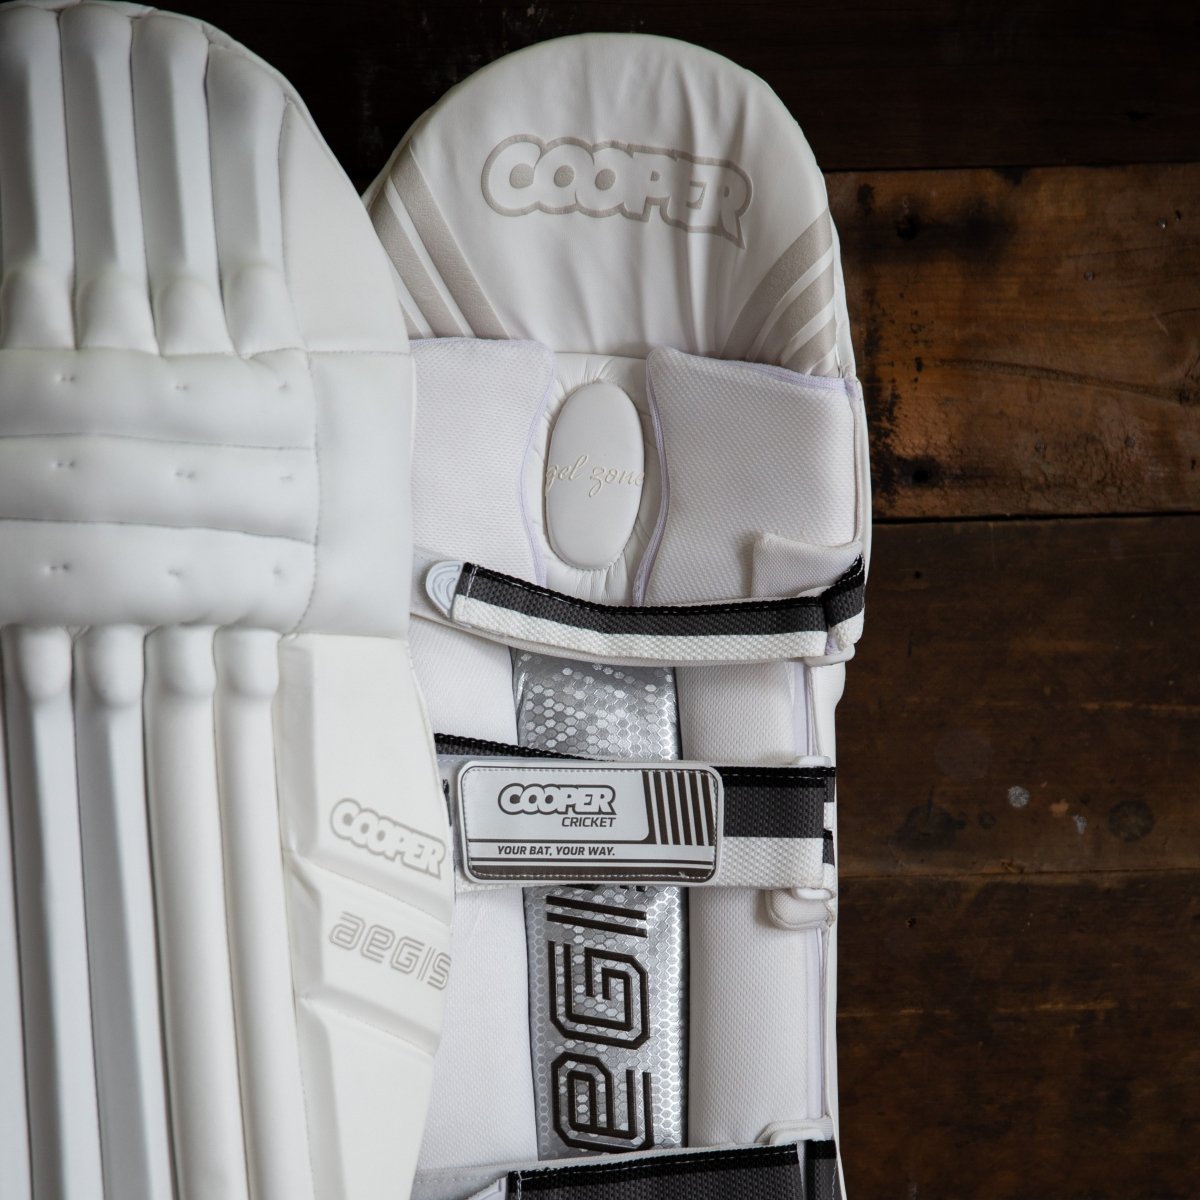 NEW SOFT-GEAR AVAILABLE IN-STORE AND ONLINE NOW! - Cooper Cricket